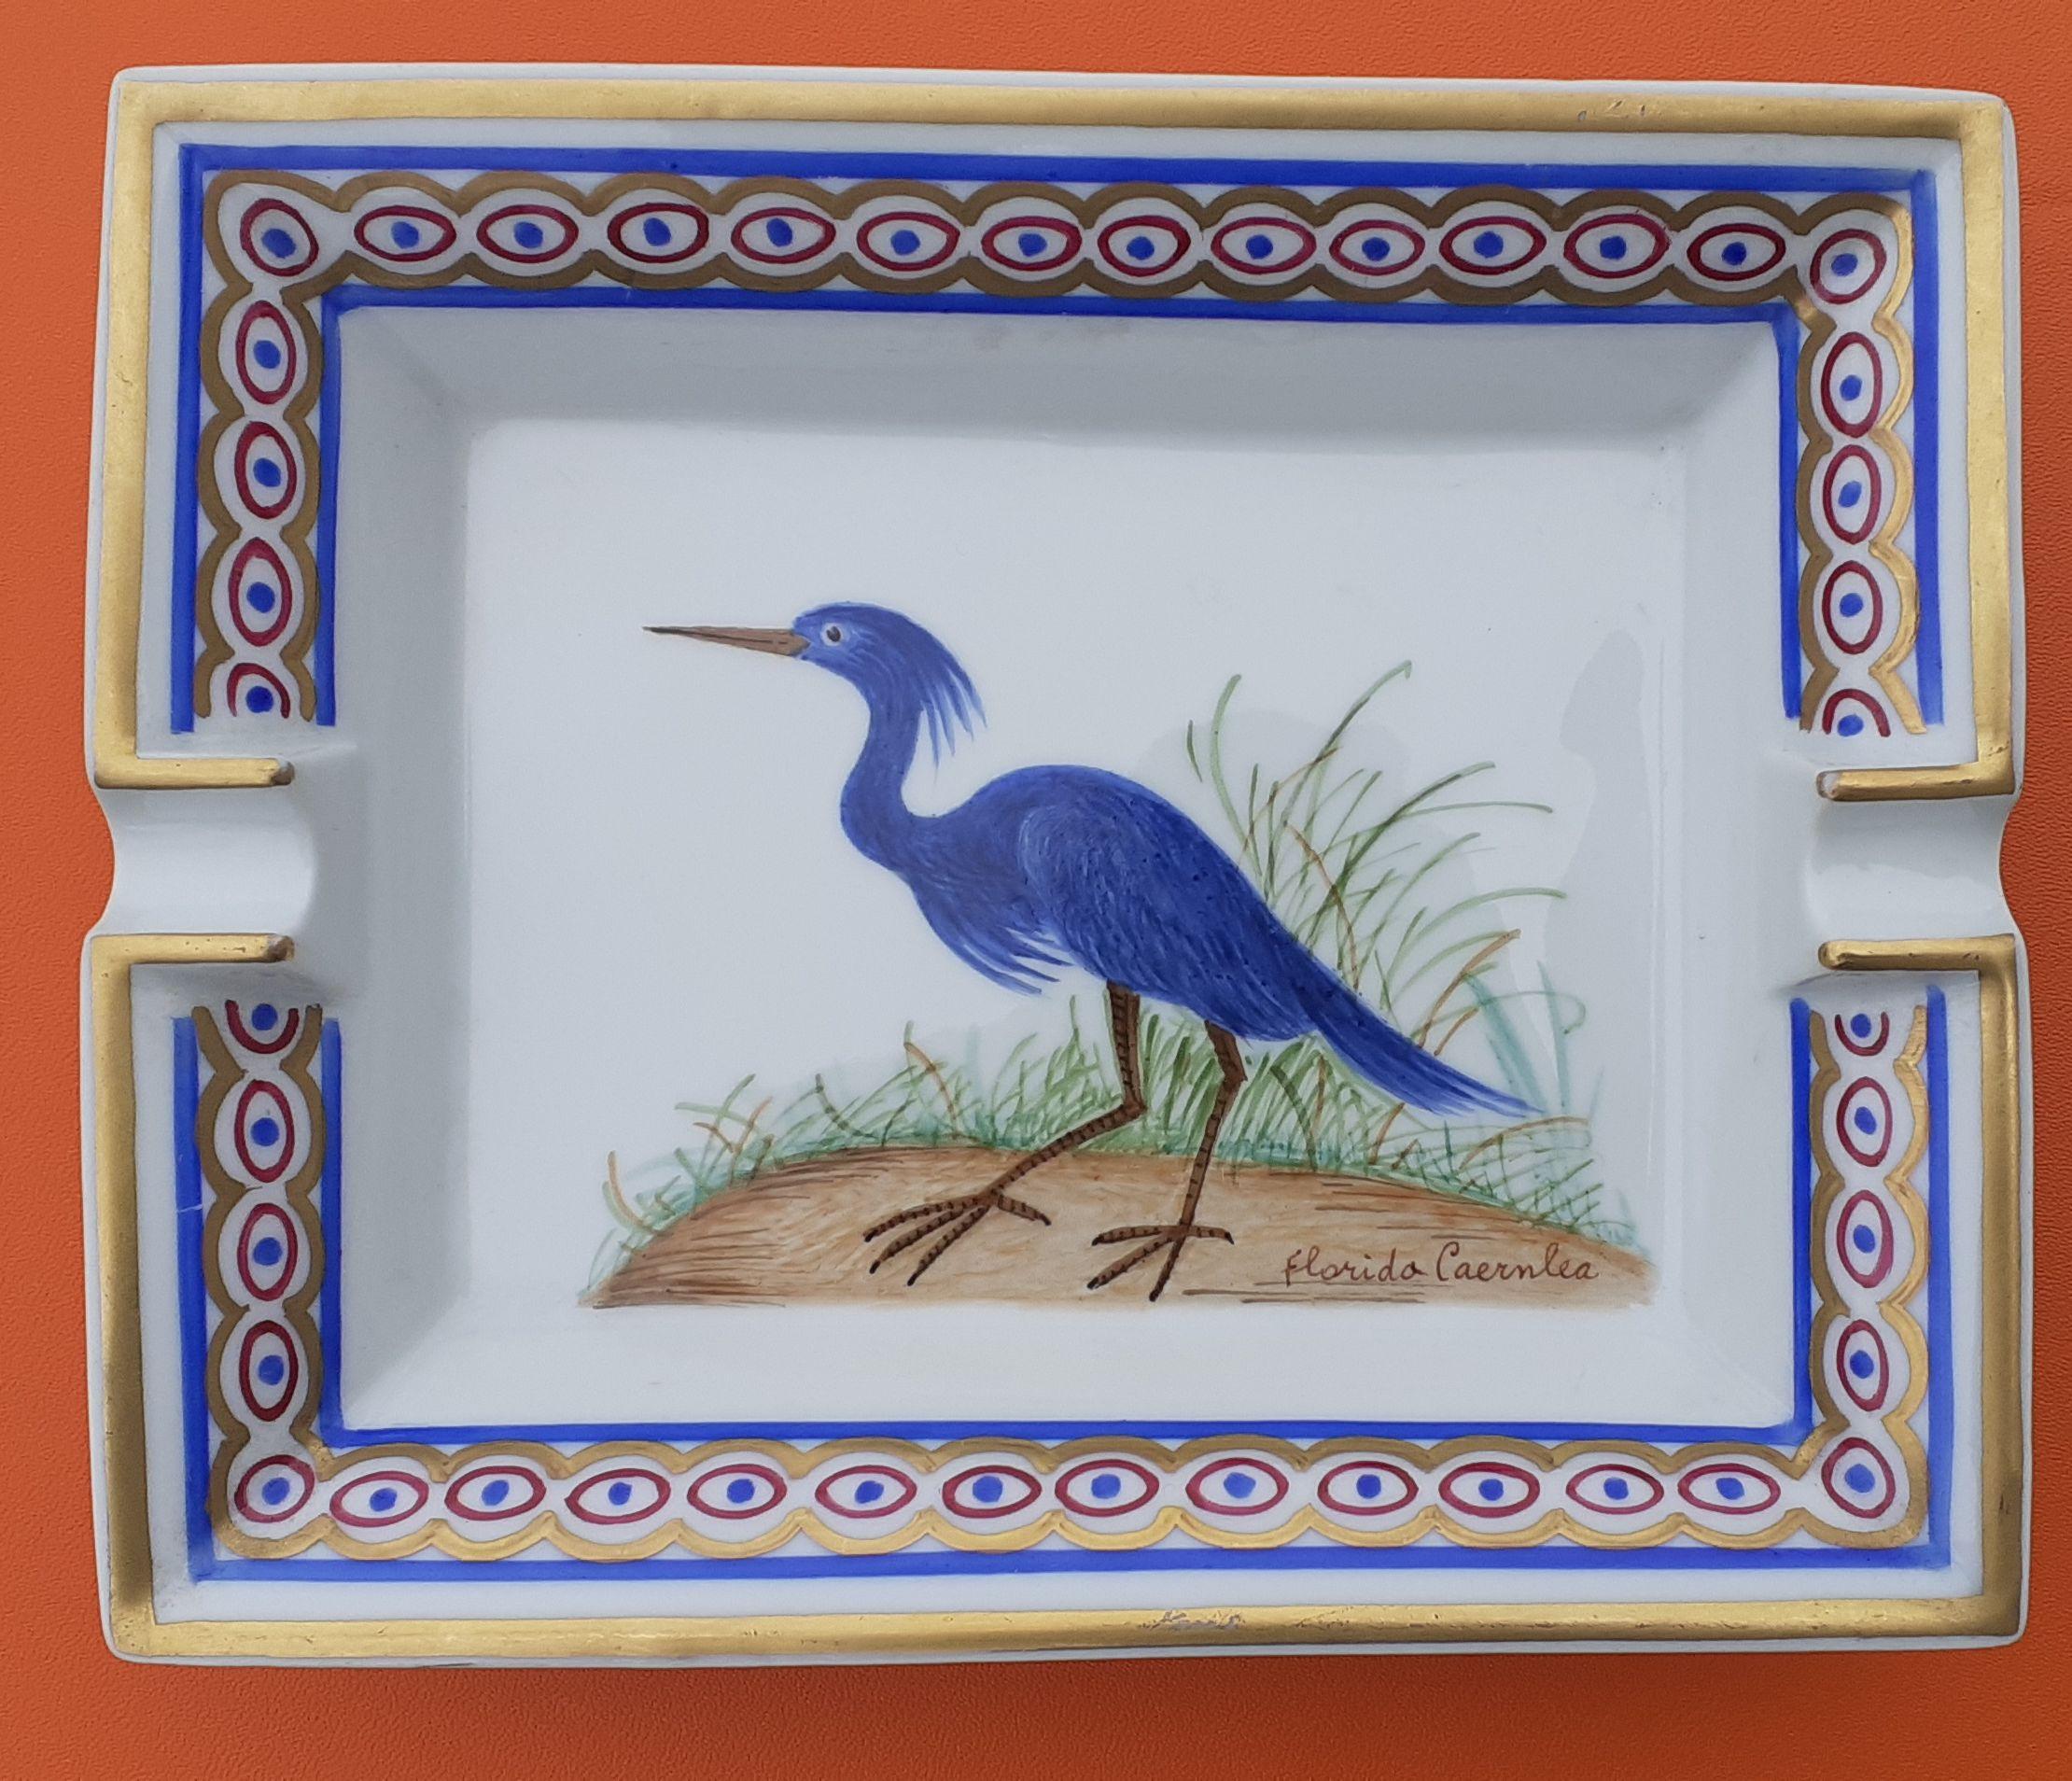 Beautiful and Rare Authentic Hermès Ashtray

Print: Florida Caerulea / Blue Egretta of Florida

Vintage Item

Made in France

Made of printed porcelain

Colorways: white, blue, red, green, beige, brown

Golden edges

Darl blue suede leather at back,